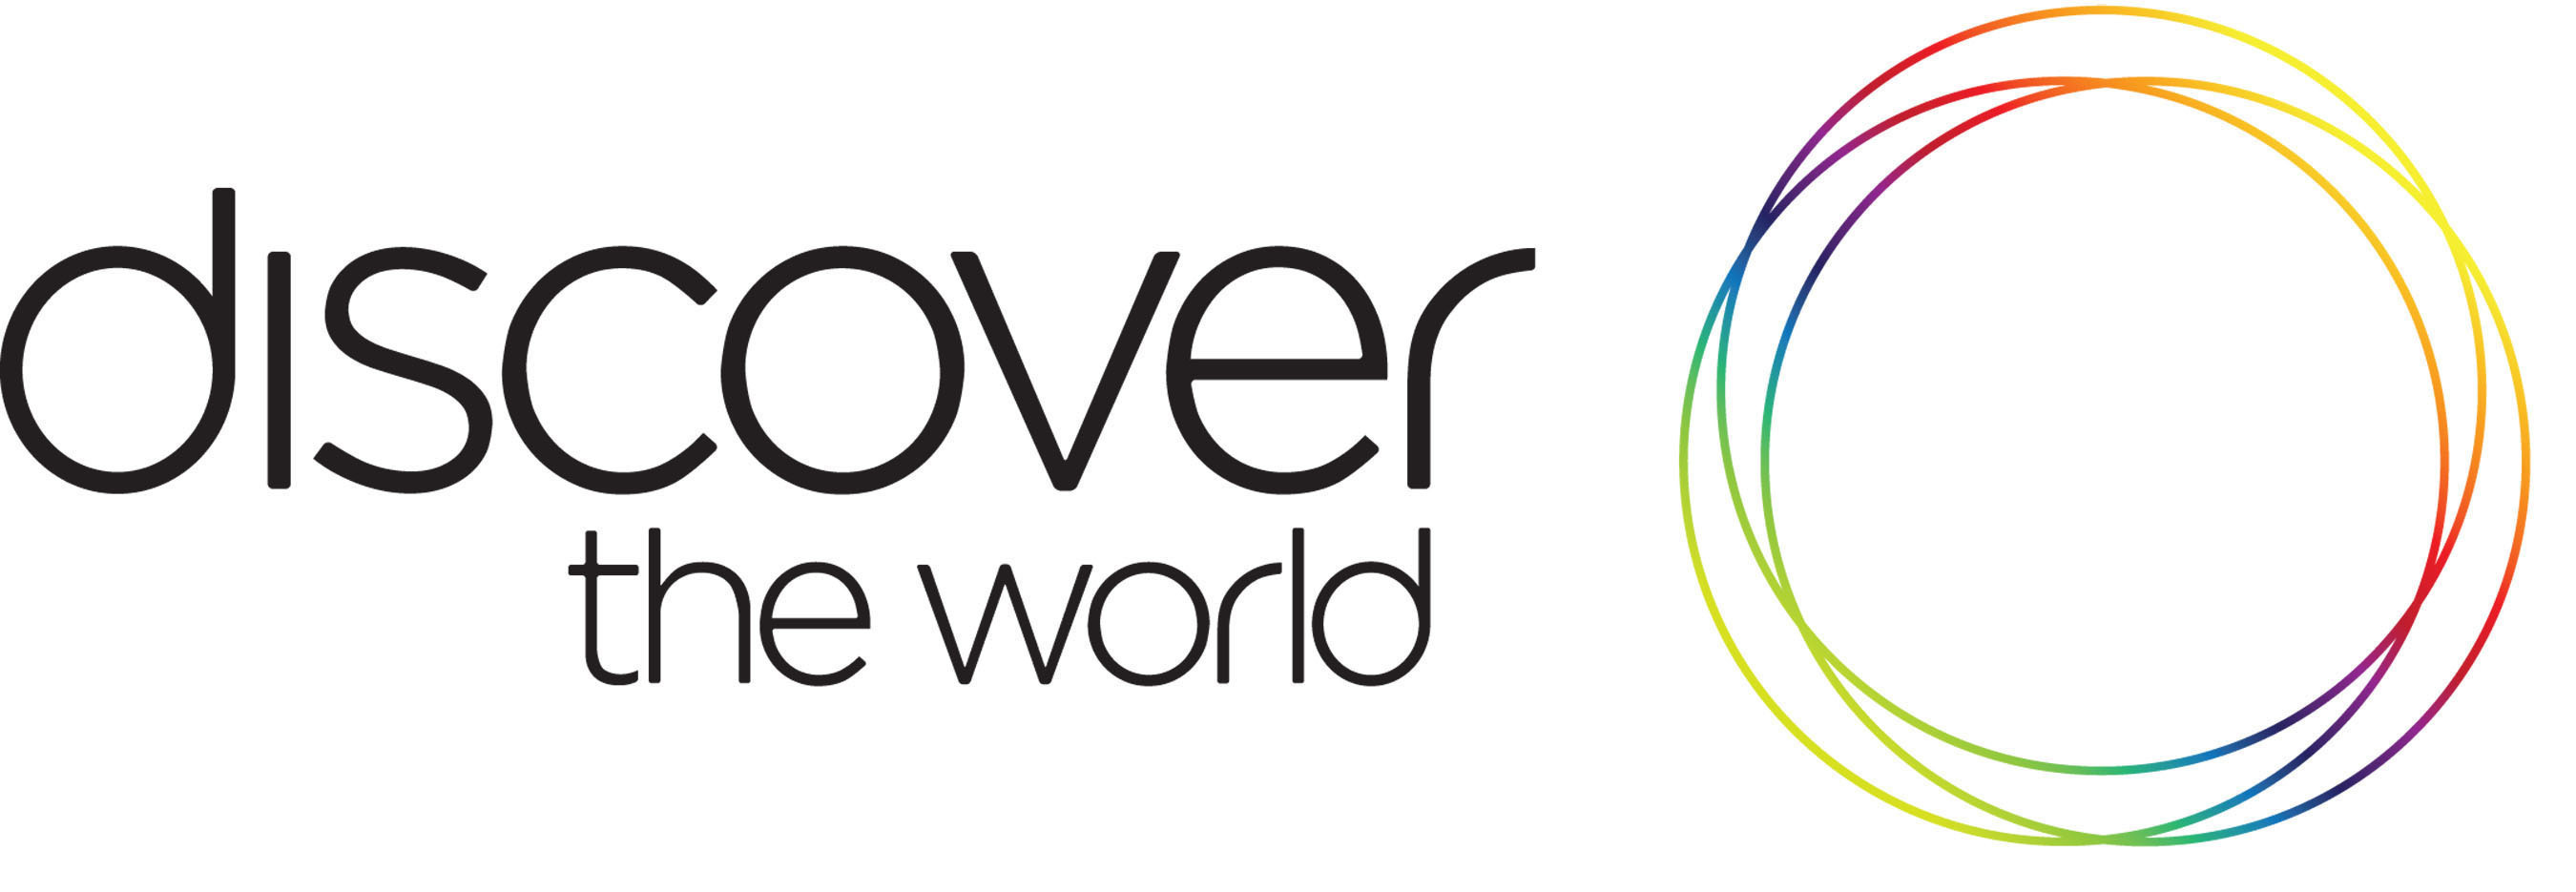 Discover the World's logo.